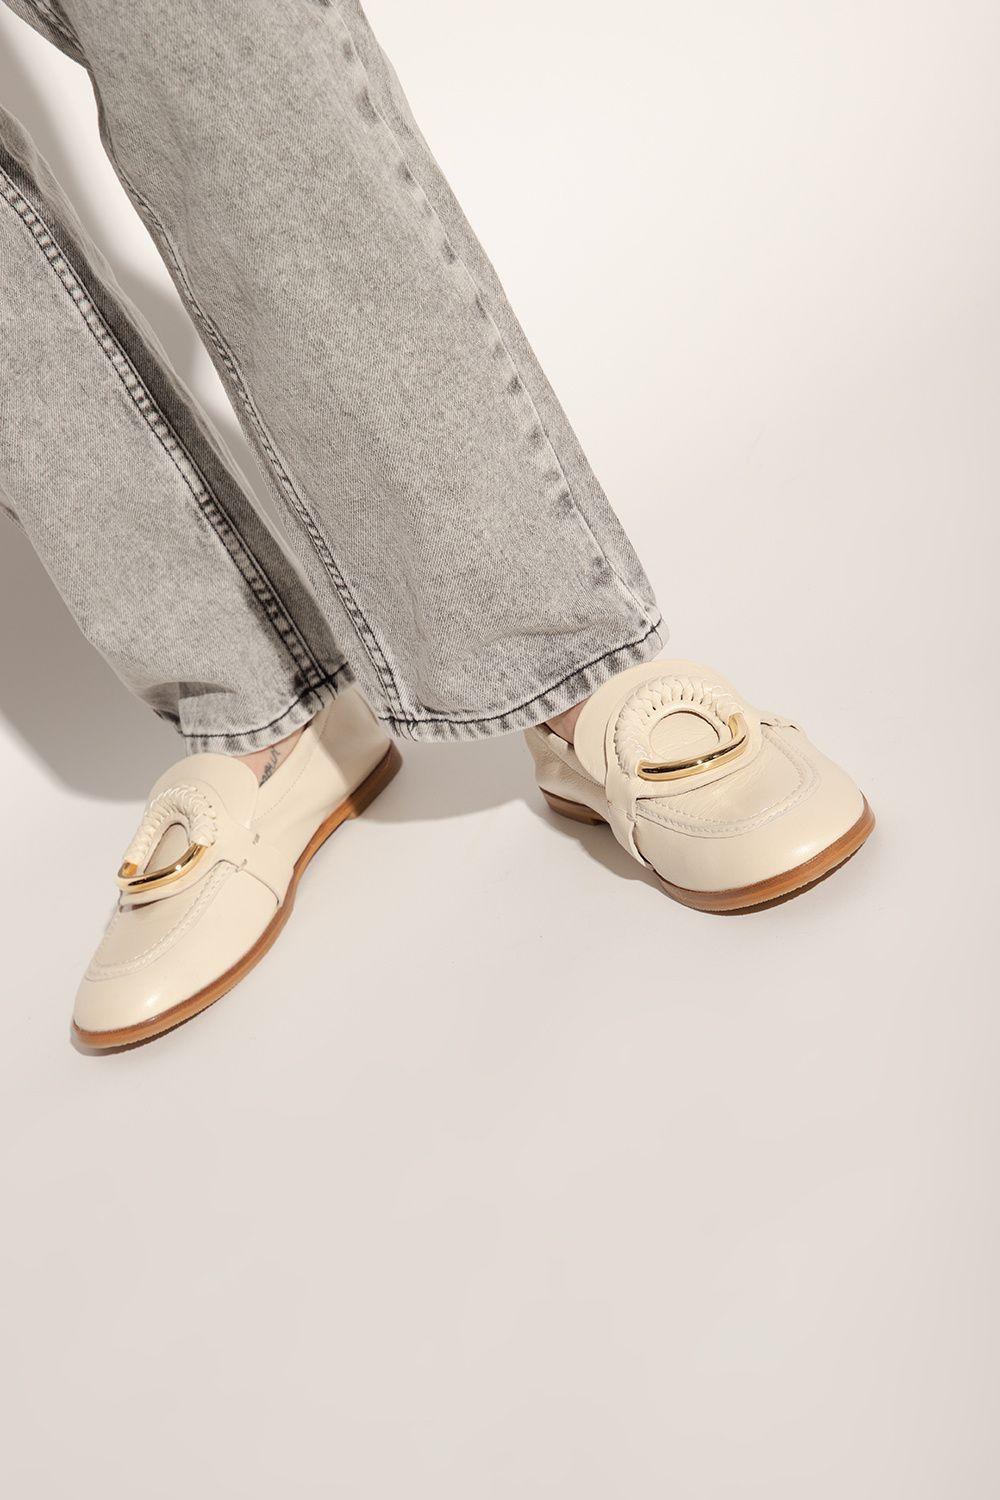 See By Chloé 'hana' Leather Loafers in White | Lyst